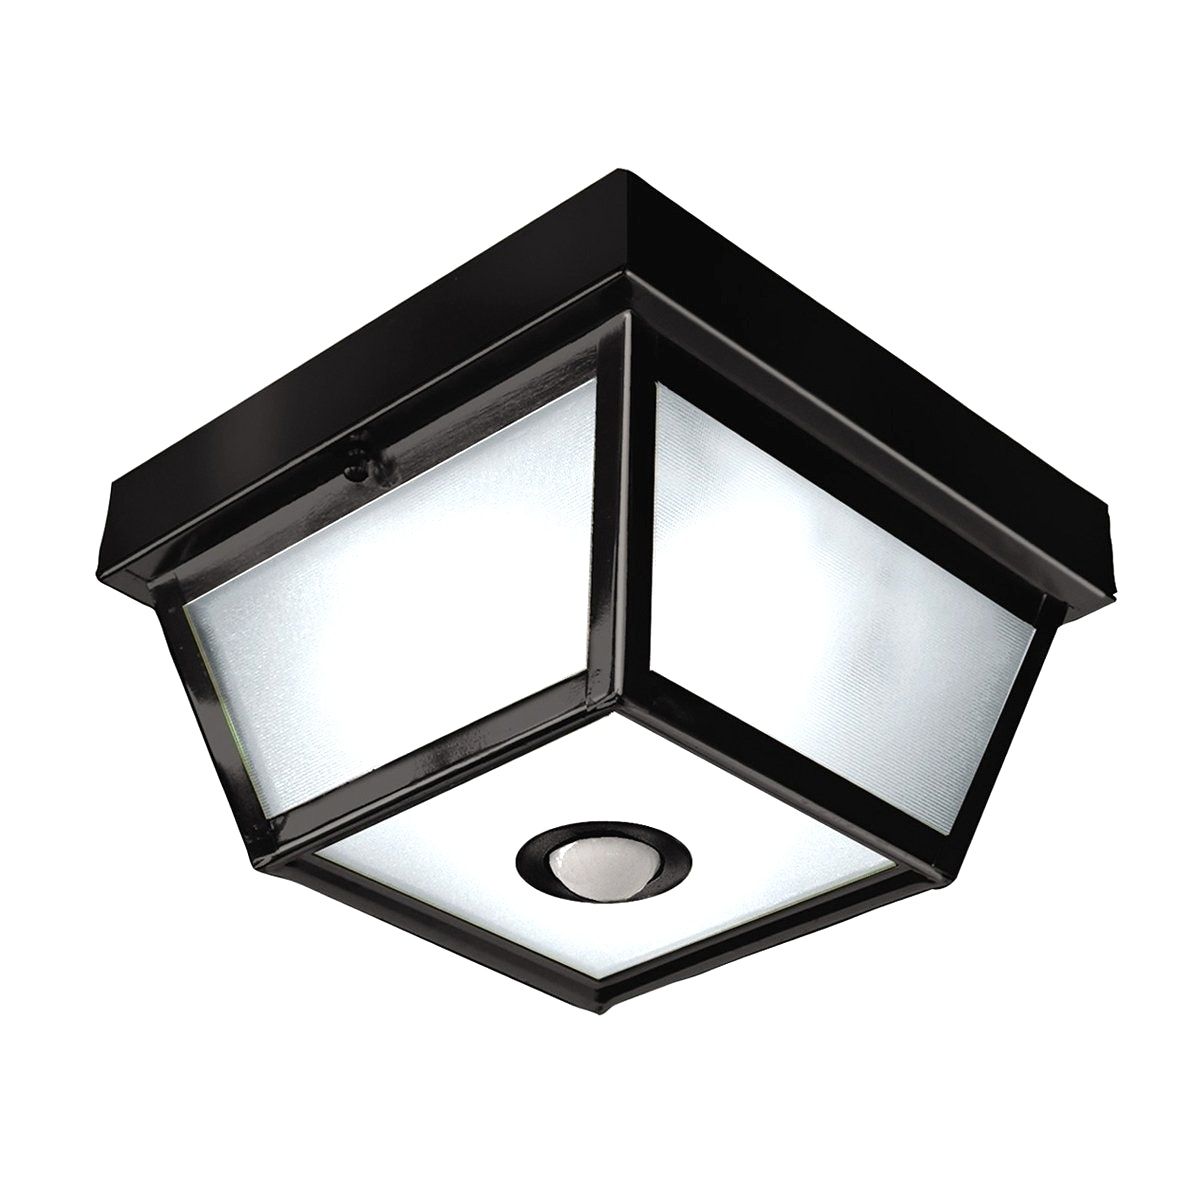 Outdoor Lighting: Astonishing Dusk To Dawn Outdoor Ceiling Light Led Within Dusk To Dawn Outdoor Ceiling Lights (View 2 of 15)